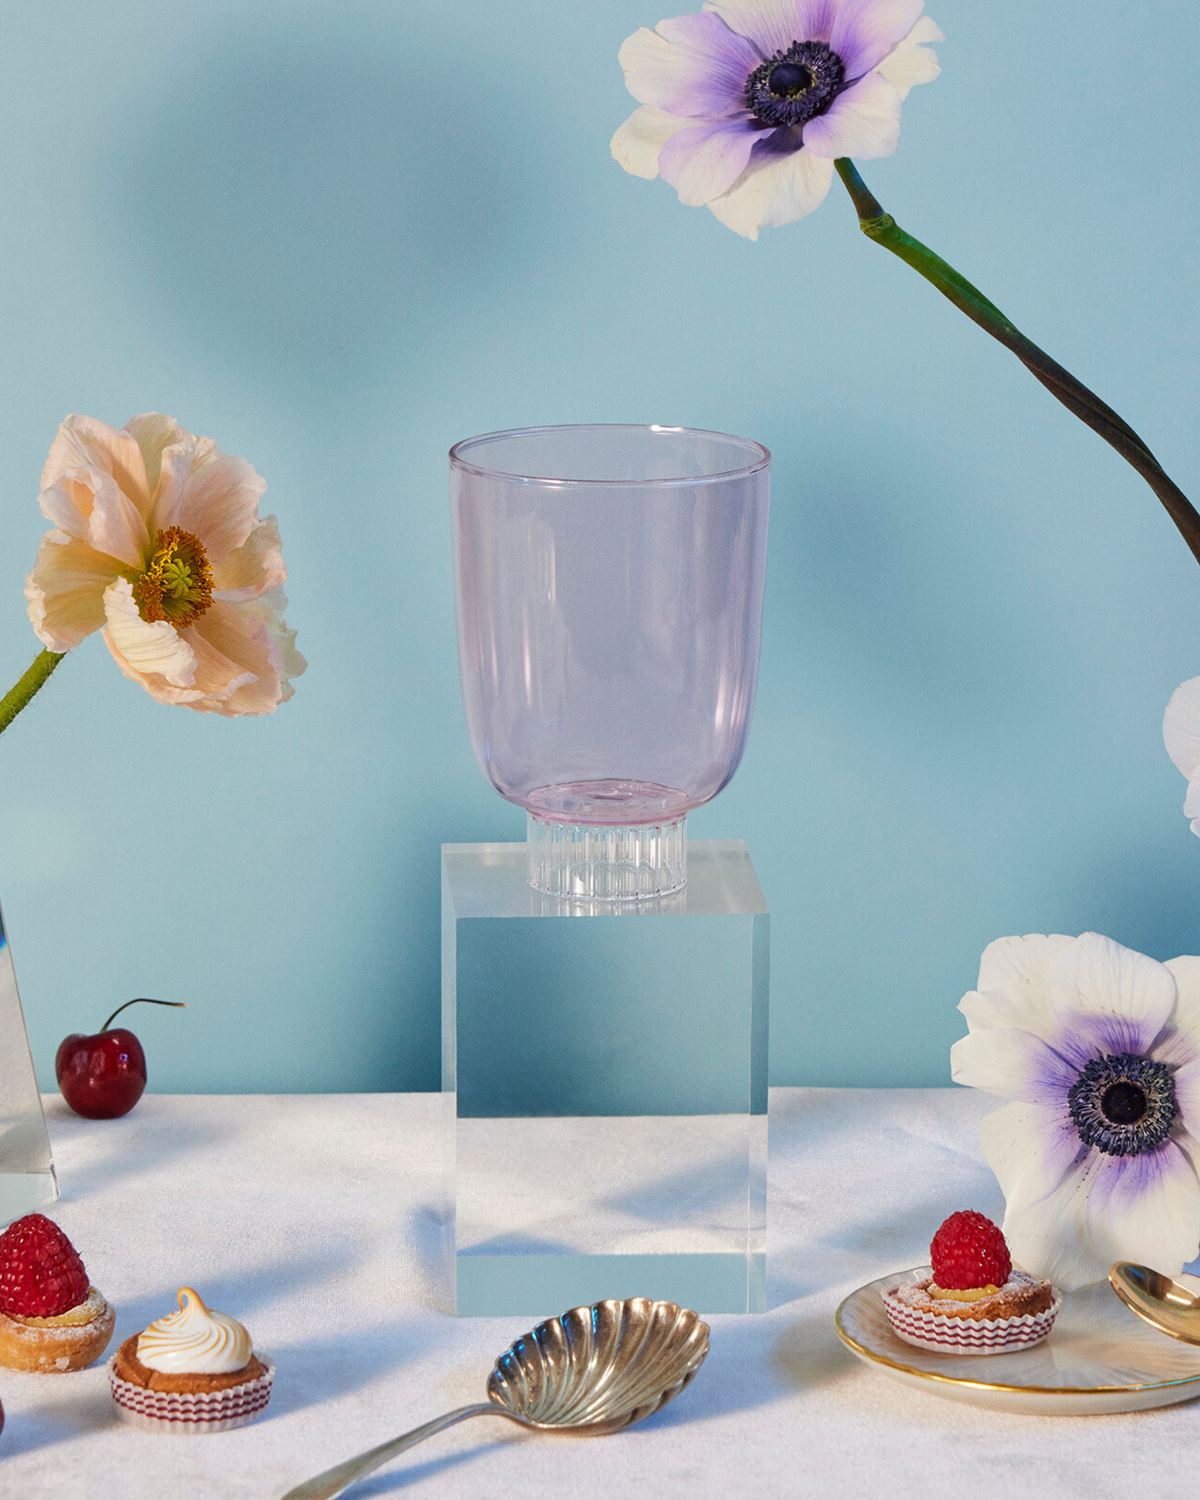 Sprezz colorful stemware. Blush pink colored water glass on a table with poppies and anemones flowers, cherries, raspberry tarts, rose strawberries, and grapes. Made from 100% borosilicate